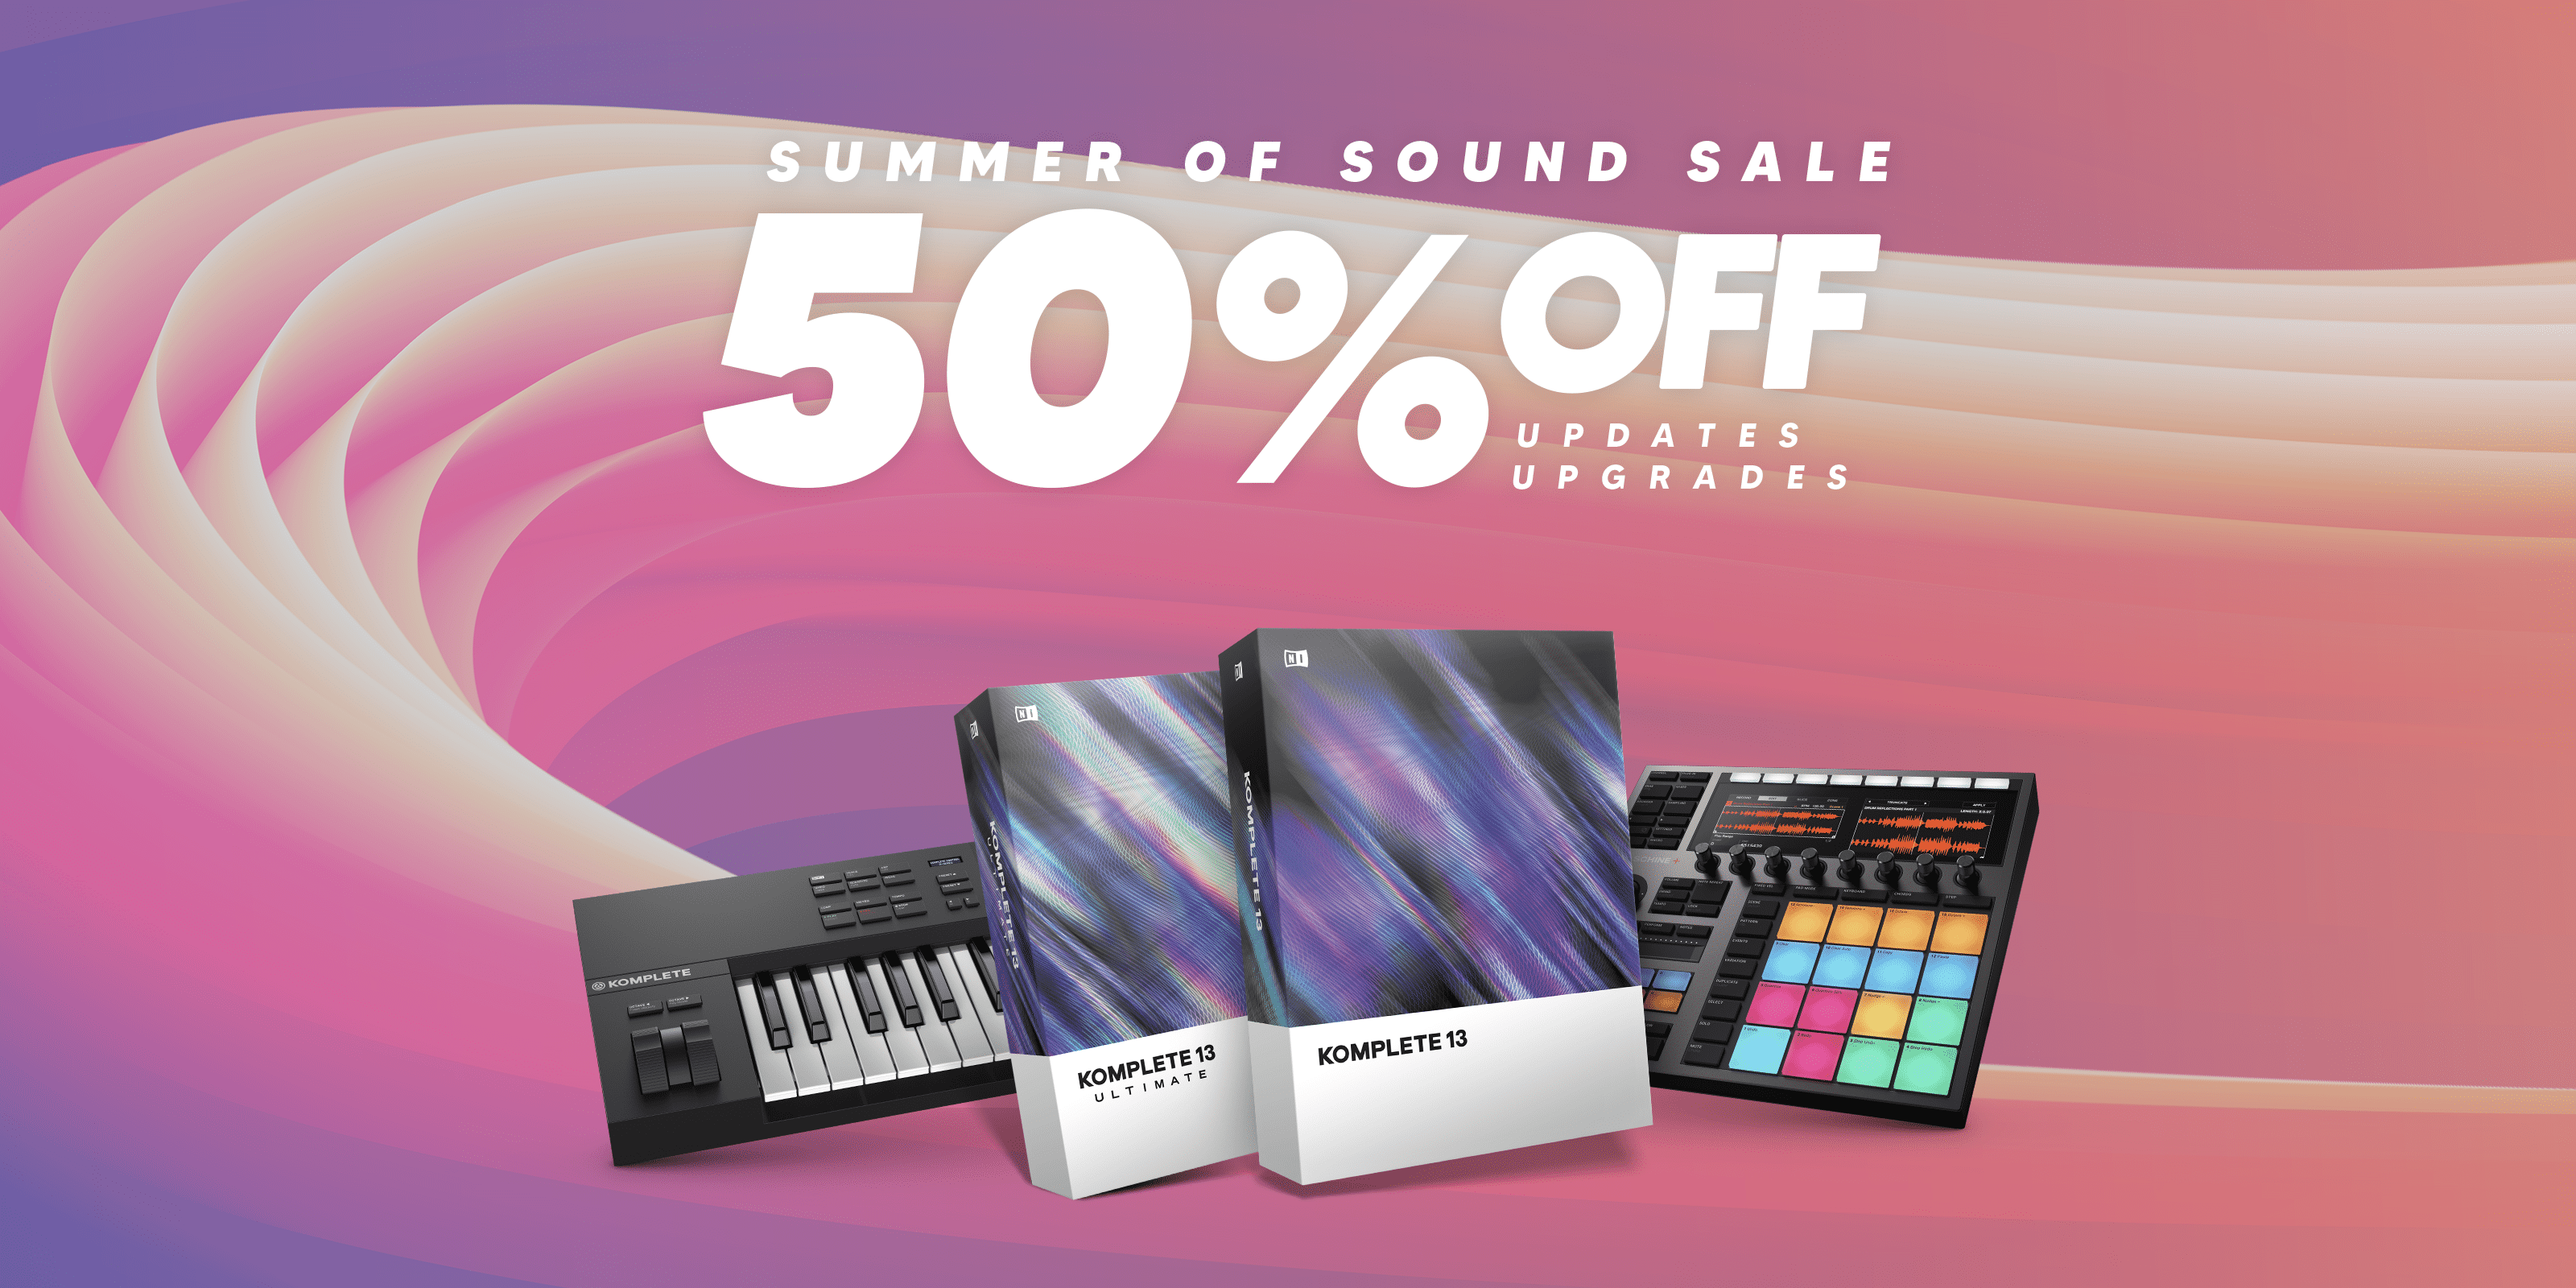 Native Instruments Launches Summer of Sound Sales